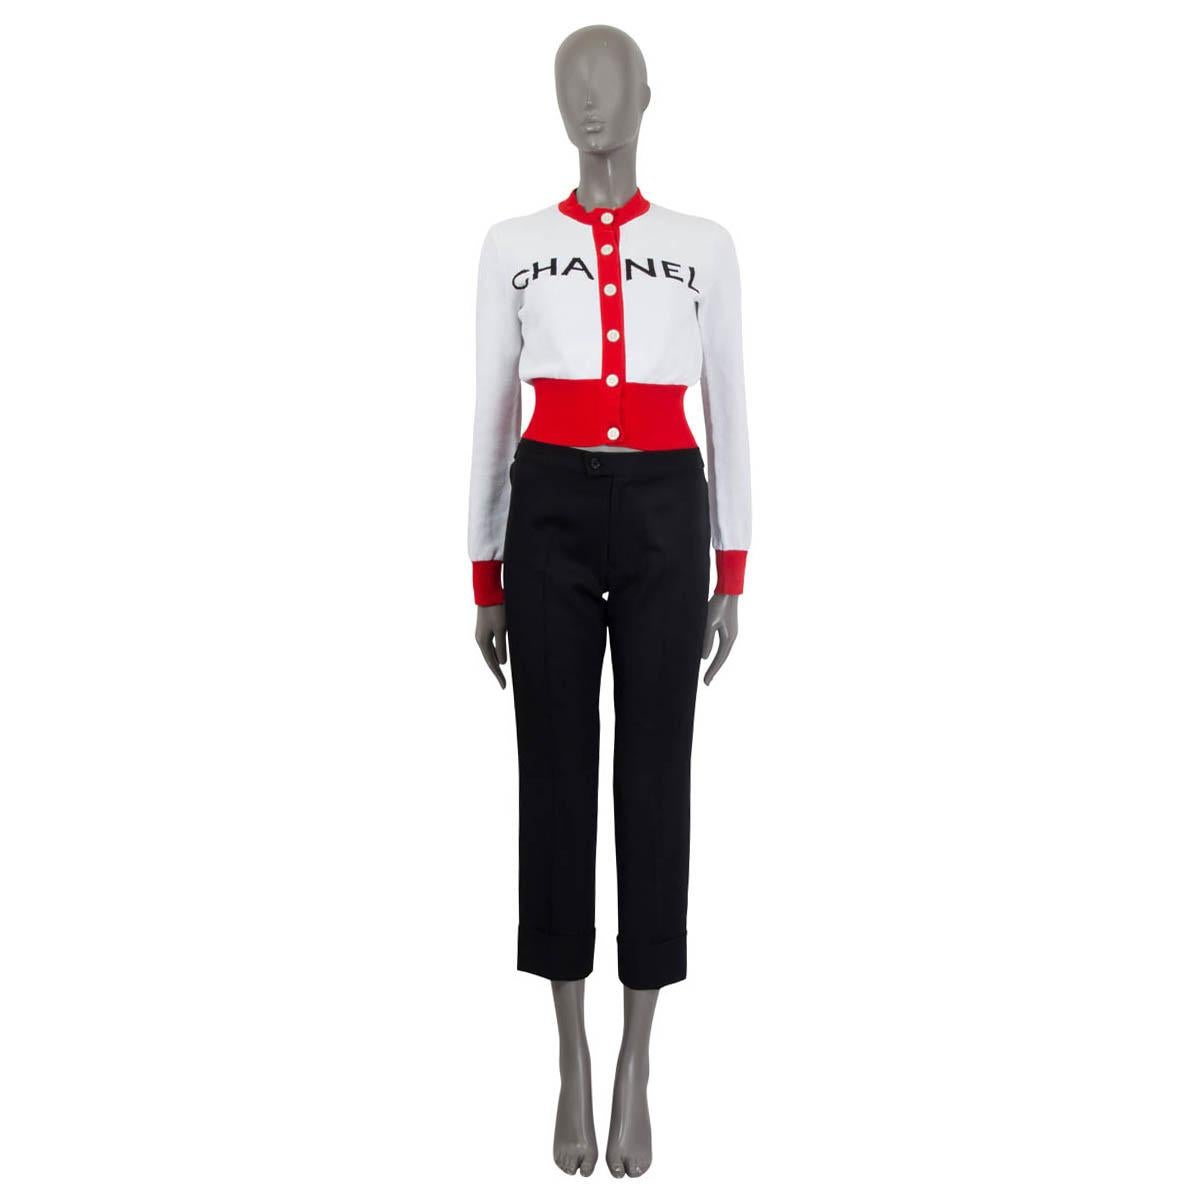 100% authentic Chanel 2019 cropped cardigan in white, red and black cotton (97%) and elastane (3%). Features the 'Chanel' logo in black on the front and long sleeves. Opens with six 'CC' metal buttons on the front. Unlined. Has been worn once or